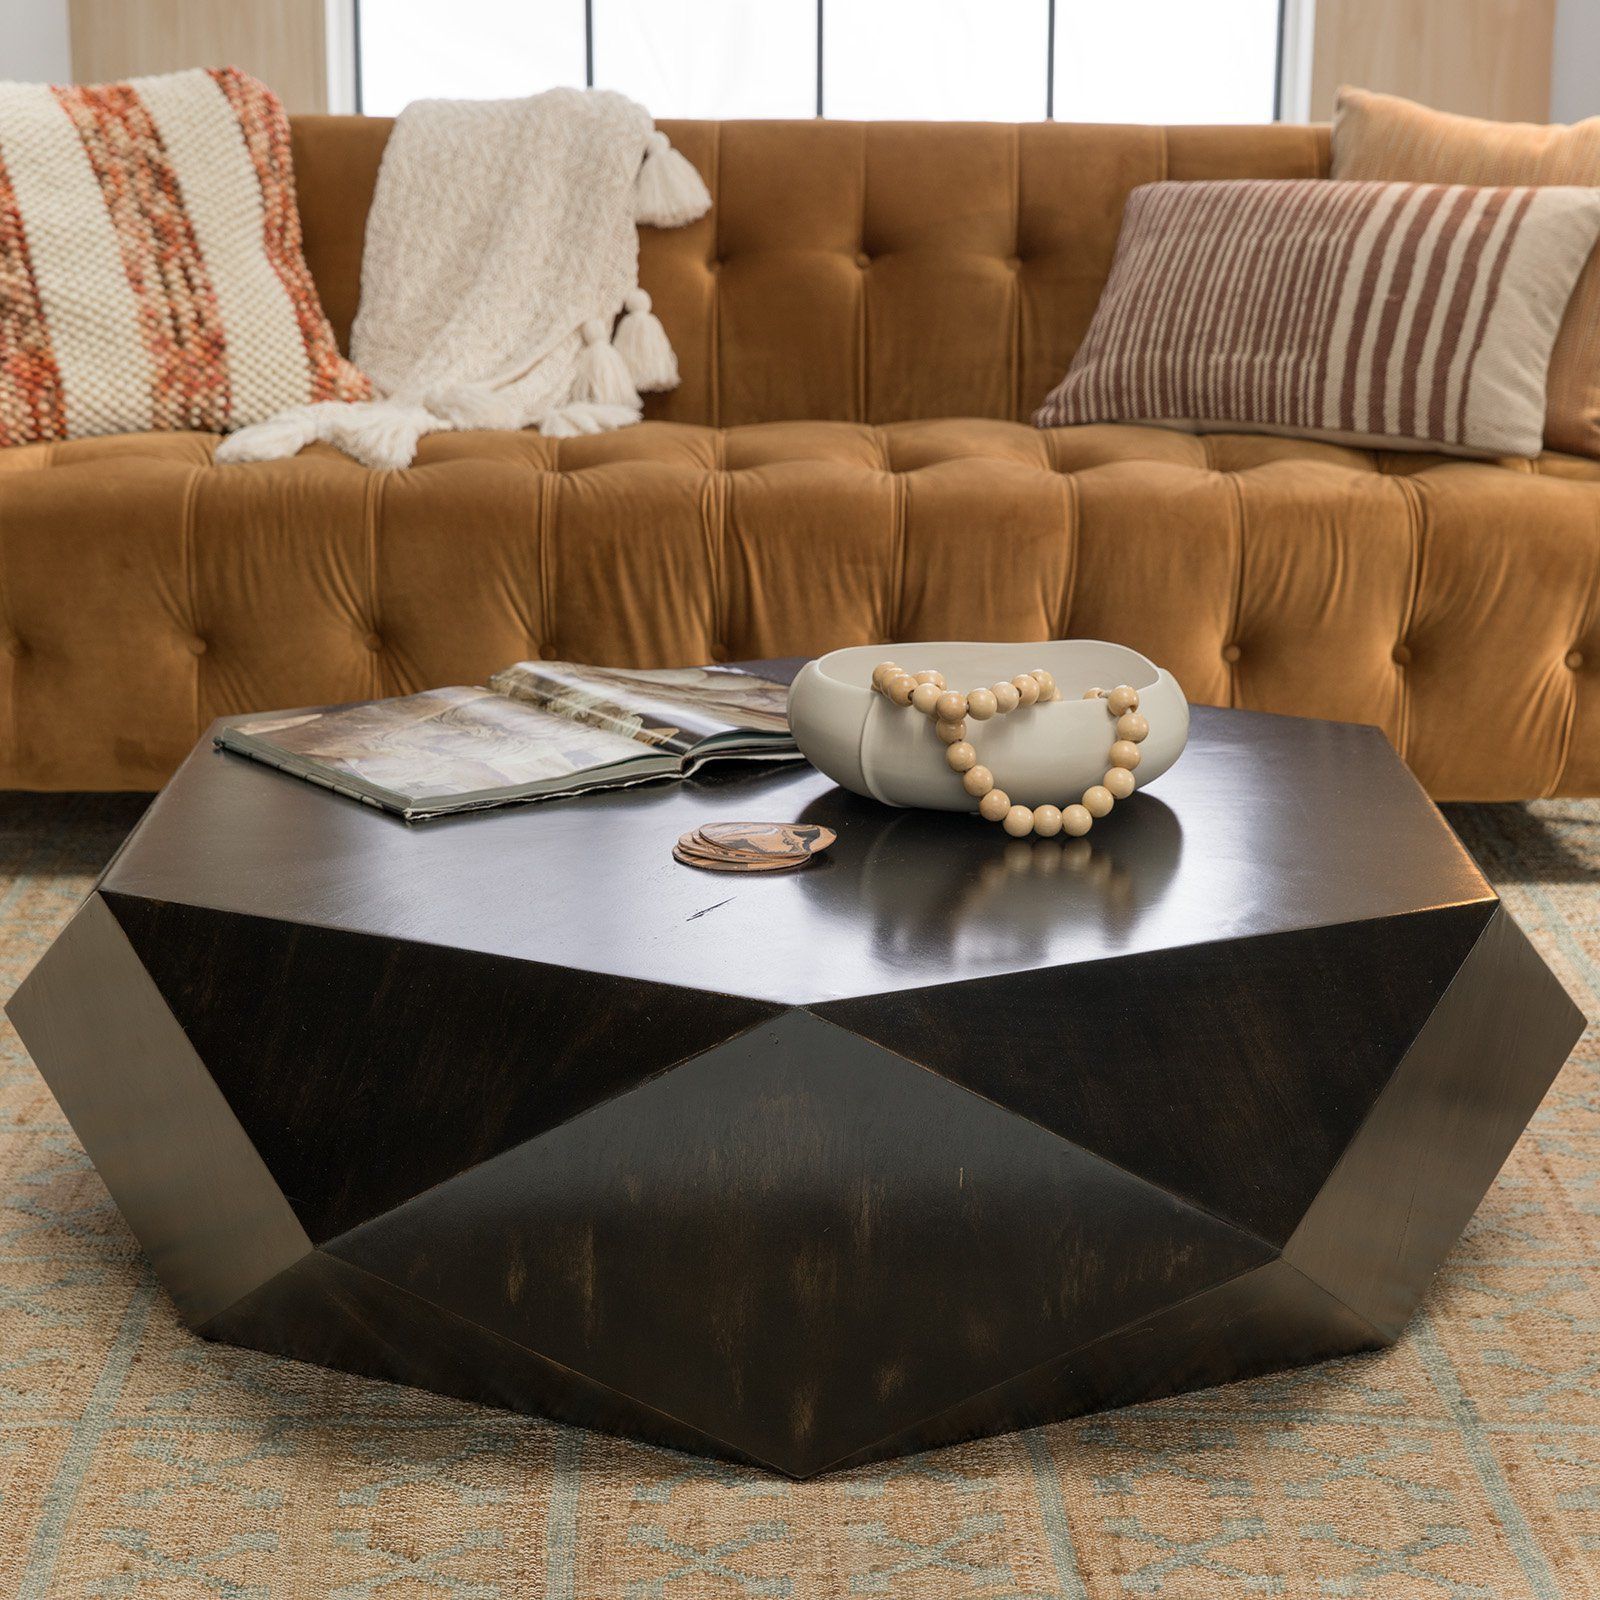 The Uttermost Volker Coffee Table With Its Modern Geometry Brings A Within Modern Wooden X Design Coffee Tables (View 15 of 20)